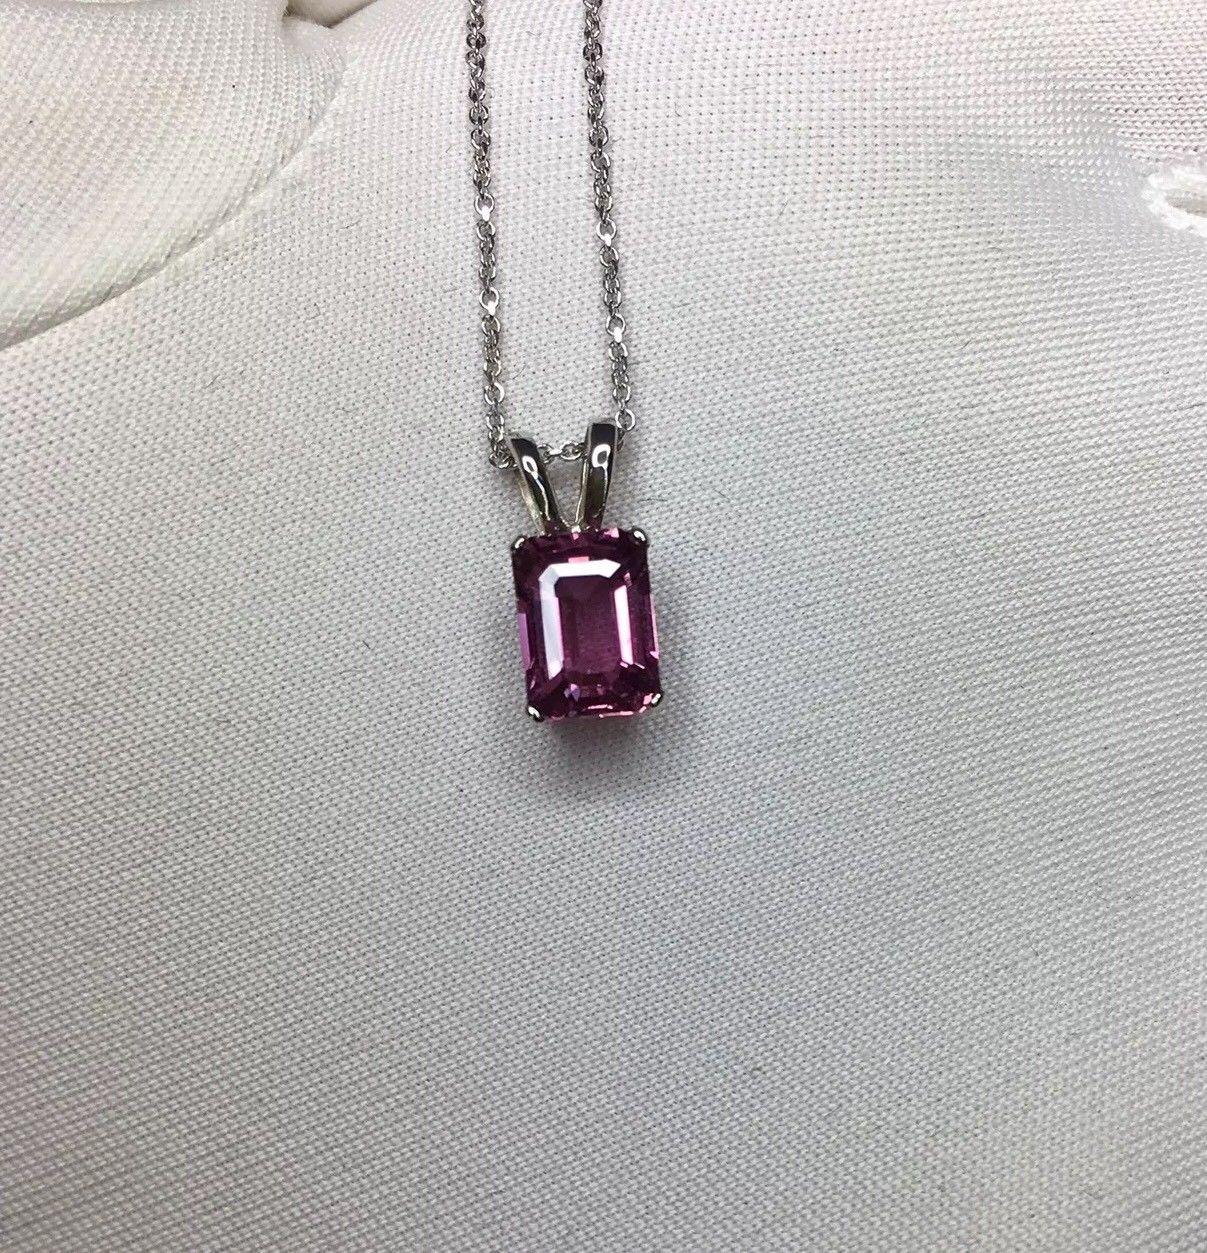 Natural vivid purplish pink sapphire solitaire pendant.

Beautiful emerald cut stone. Set in a fine 14k white gold pendant setting.

It has an excellent emerald cut with vivid colour and superb clarity. Very clean. 
Fully certified by GIA confirming